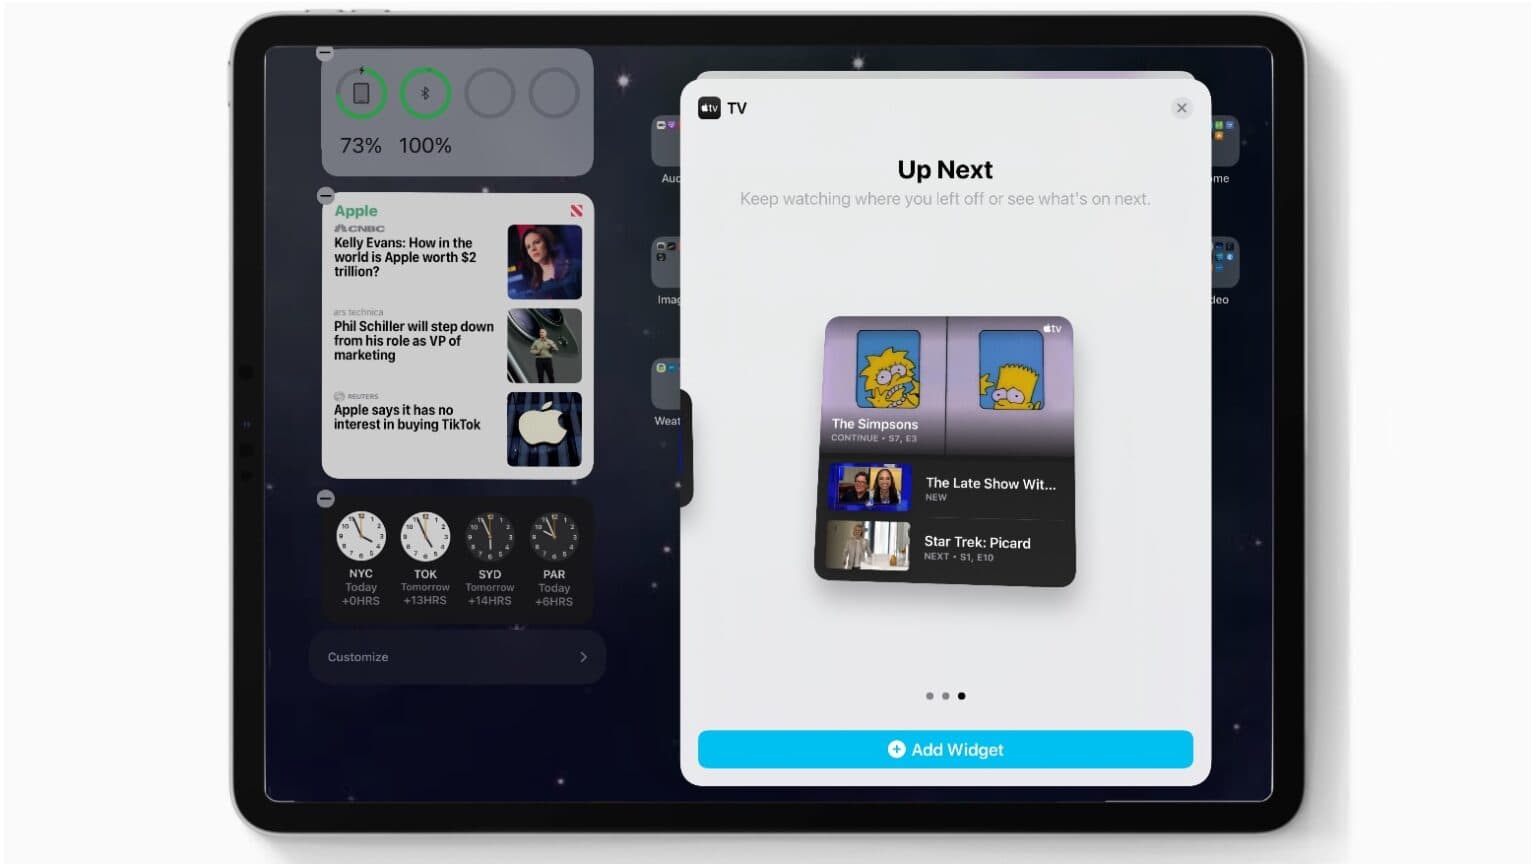 iOS 14 Beta 4 makes it easier to watch TV on your iPad